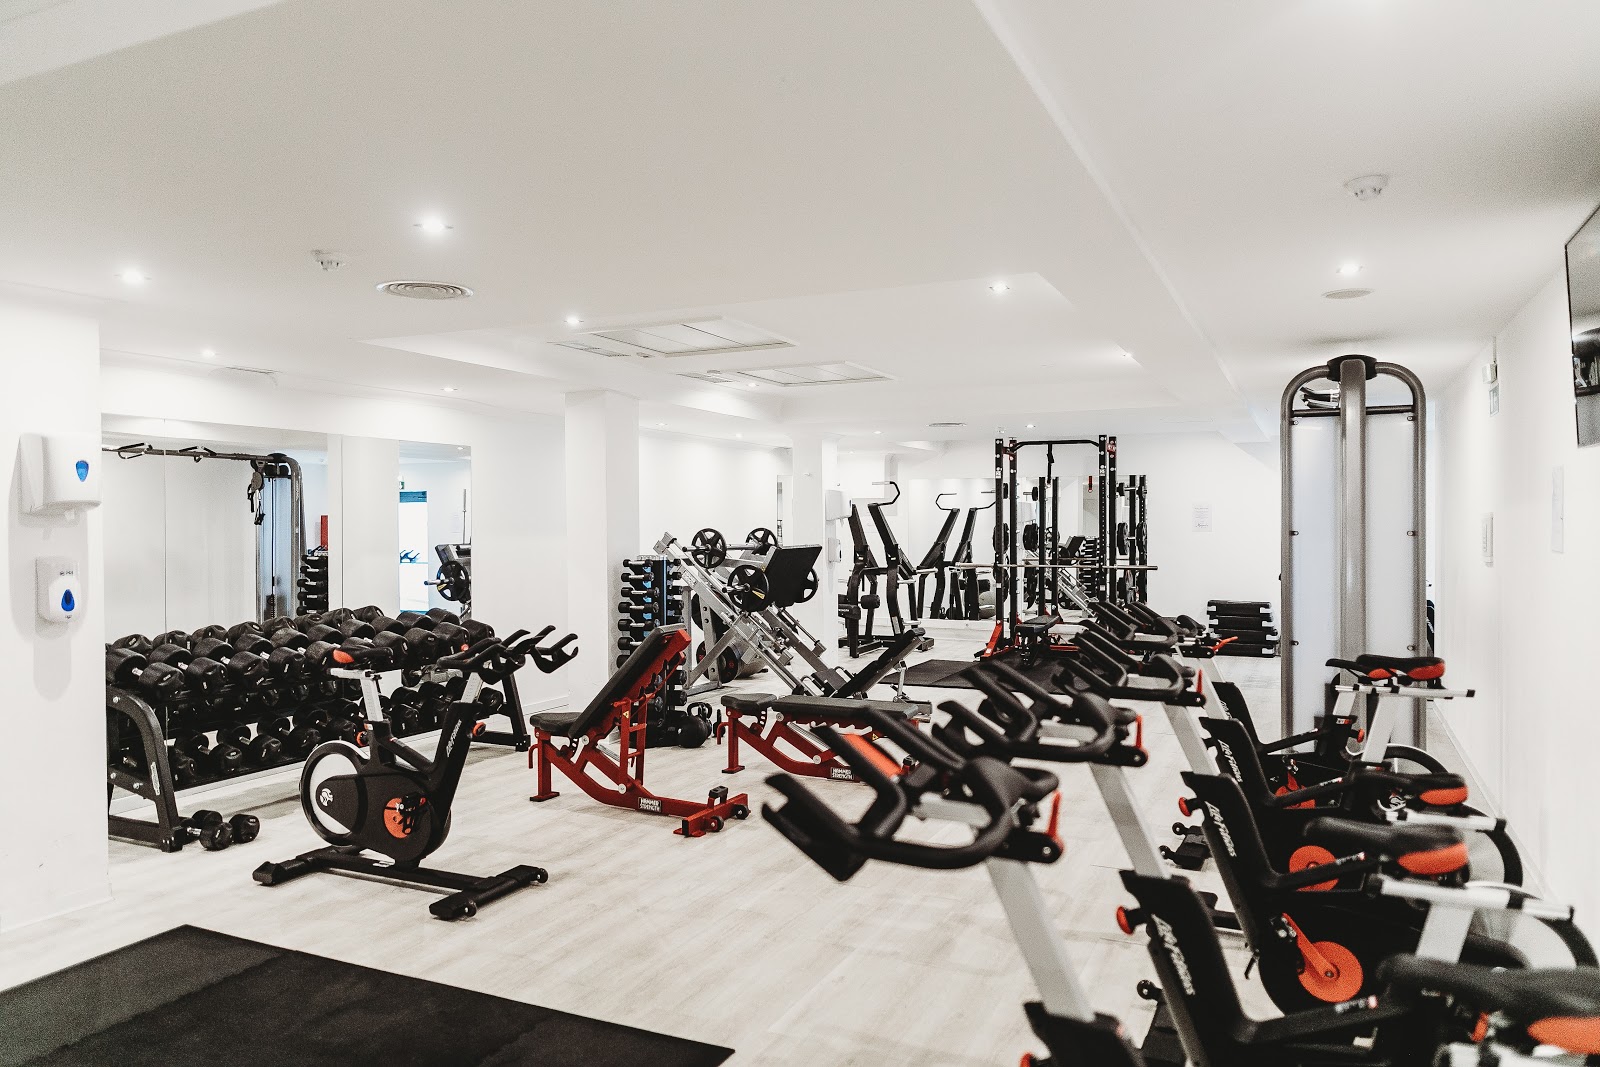 6 Essentials of a Fitness Gym Floor Plan that “Wow”